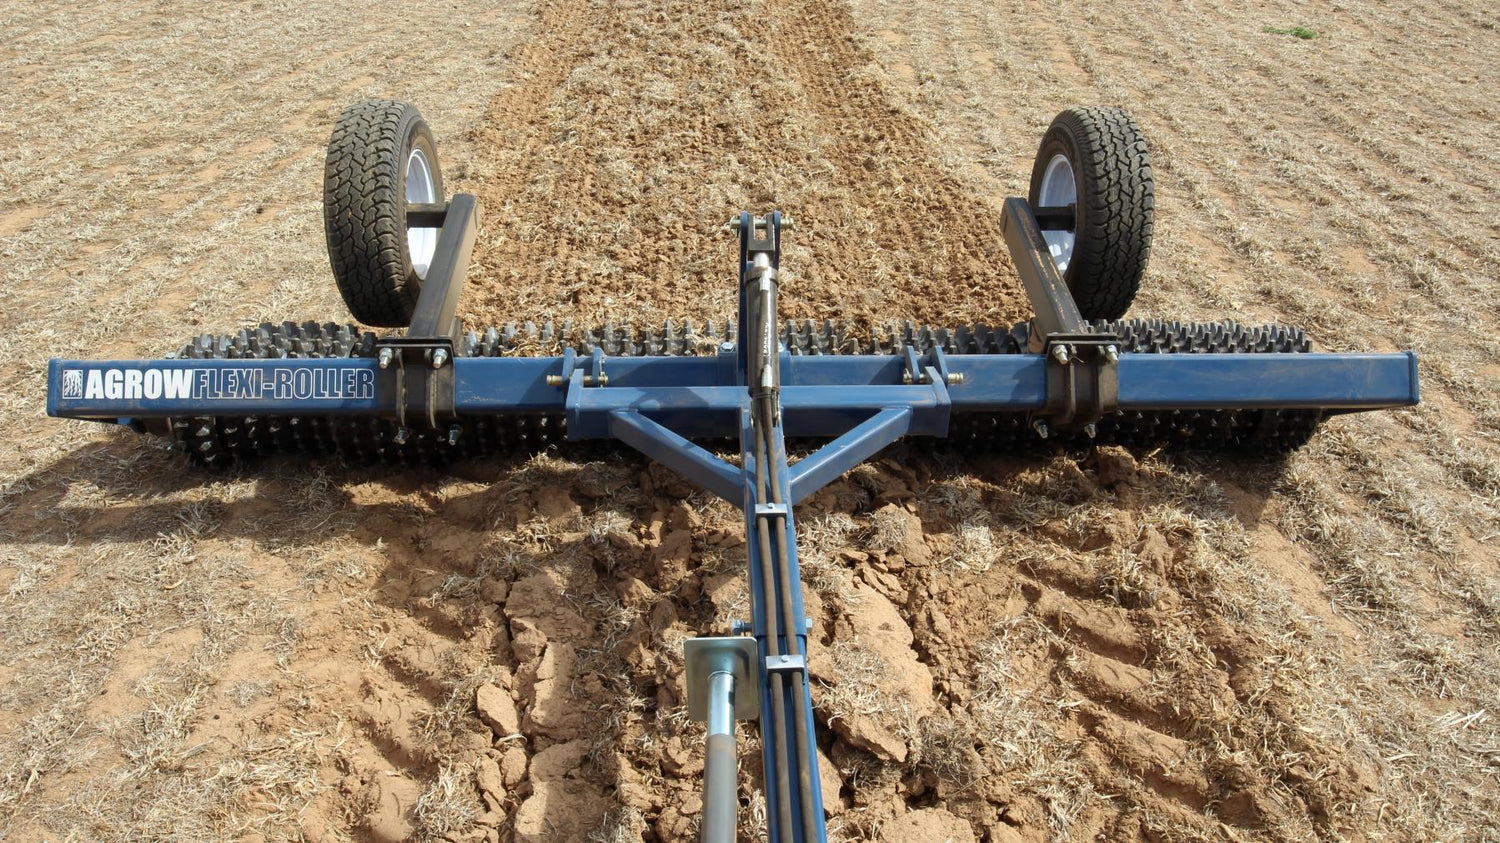 A flexi-roller smoothing the soil behind a deep ripper